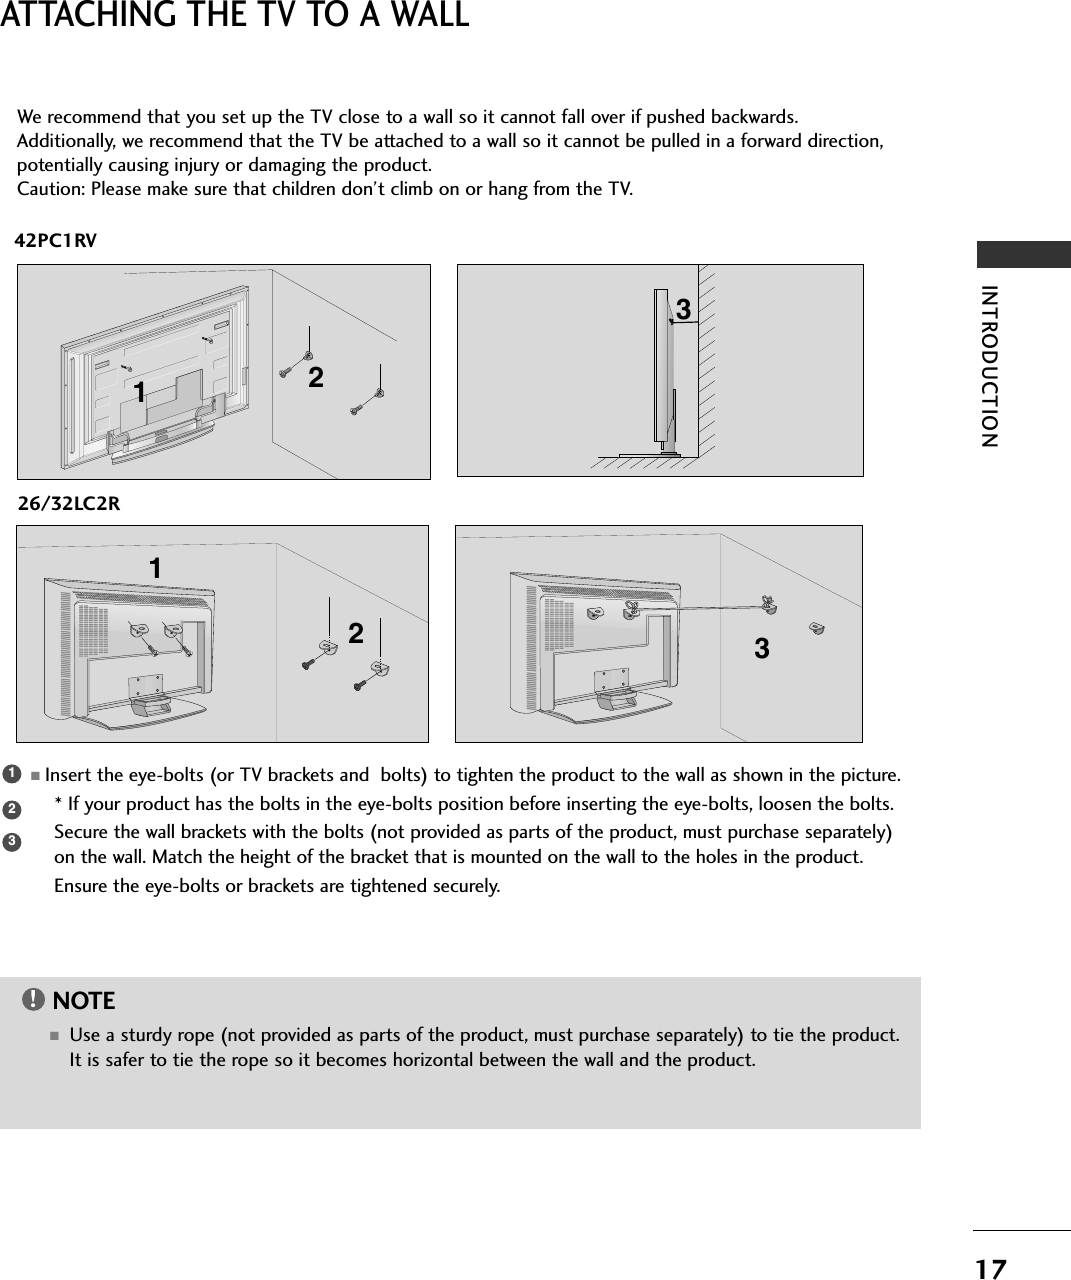 17INTRODUCTIONATTACHING THE TV TO A WALL42PC1RV26/32LC2R2 13We recommend that you set up the TV close to a wall so it cannot fall over if pushed backwards. Additionally, we recommend that the TV be attached to a wall so it cannot be pulled in a forward direction,potentially causing injury or damaging the product. Caution: Please make sure that children don’t climb on or hang from the TV. 123■Insert the eye-bolts (or TV brackets and  bolts) to tighten the product to the wall as shown in the picture. * If your product has the bolts in the eye-bolts position before inserting the eye-bolts, loosen the bolts.Secure the wall brackets with the bolts (not provided as parts of the product, must purchase separately)on the wall. Match the height of the bracket that is mounted on the wall to the holes in the product.Ensure the eye-bolts or brackets are tightened securely.NOTE!■Use a sturdy rope (not provided as parts of the product, must purchase separately) to tie the product.It is safer to tie the rope so it becomes horizontal between the wall and the product.2 31